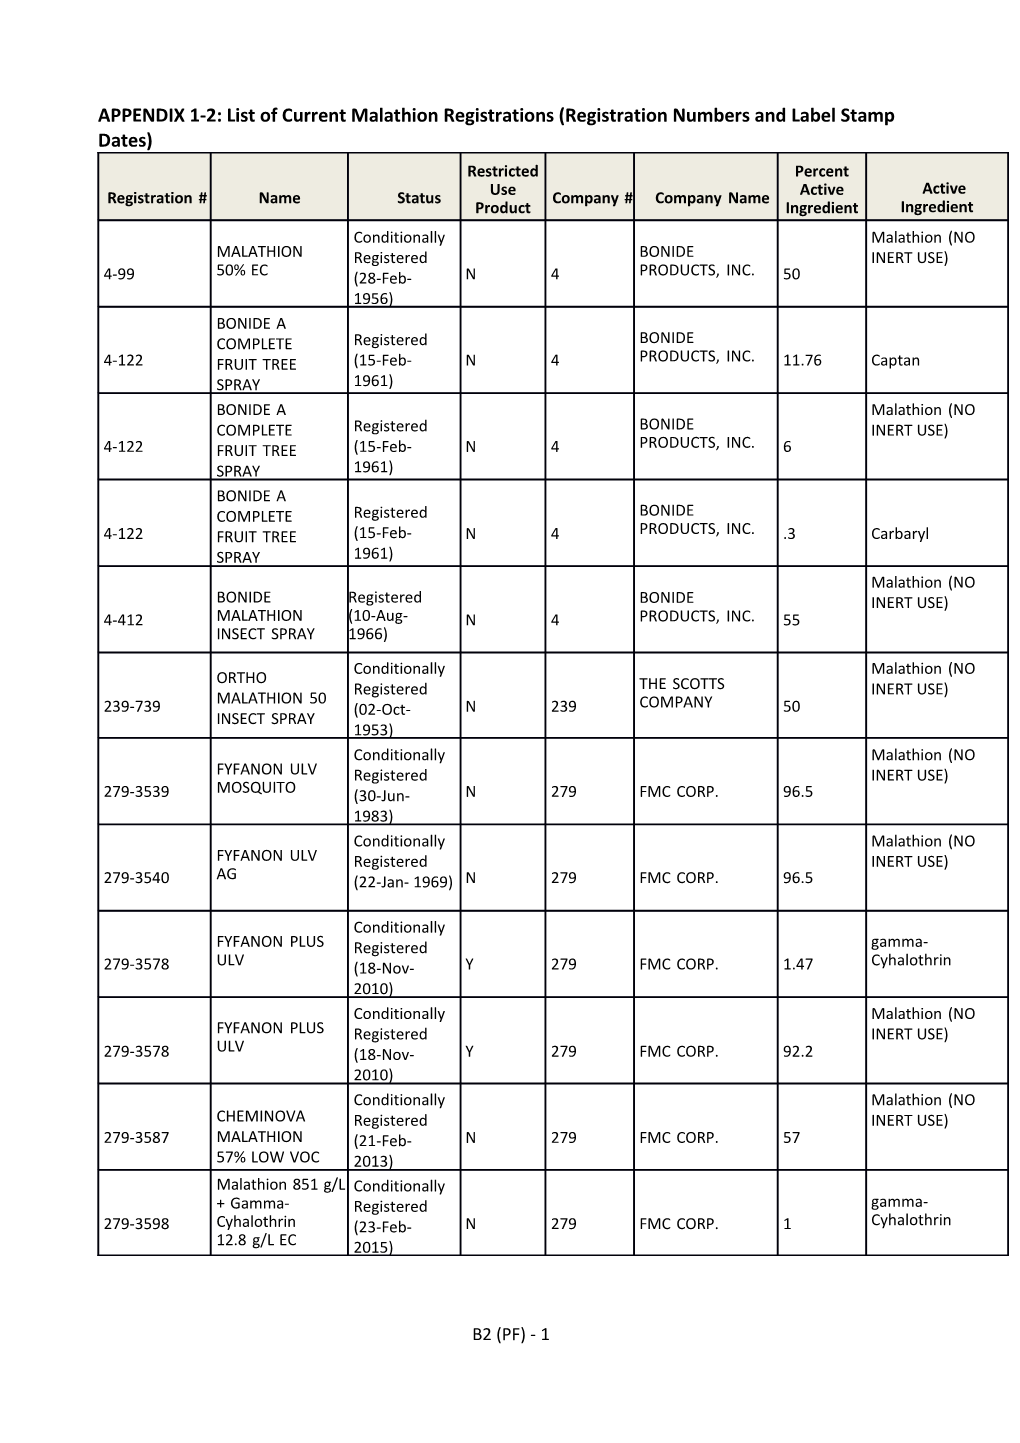 APPENDIX 1-2: List of Current Malathion Registrations (Registration Numbers and Label